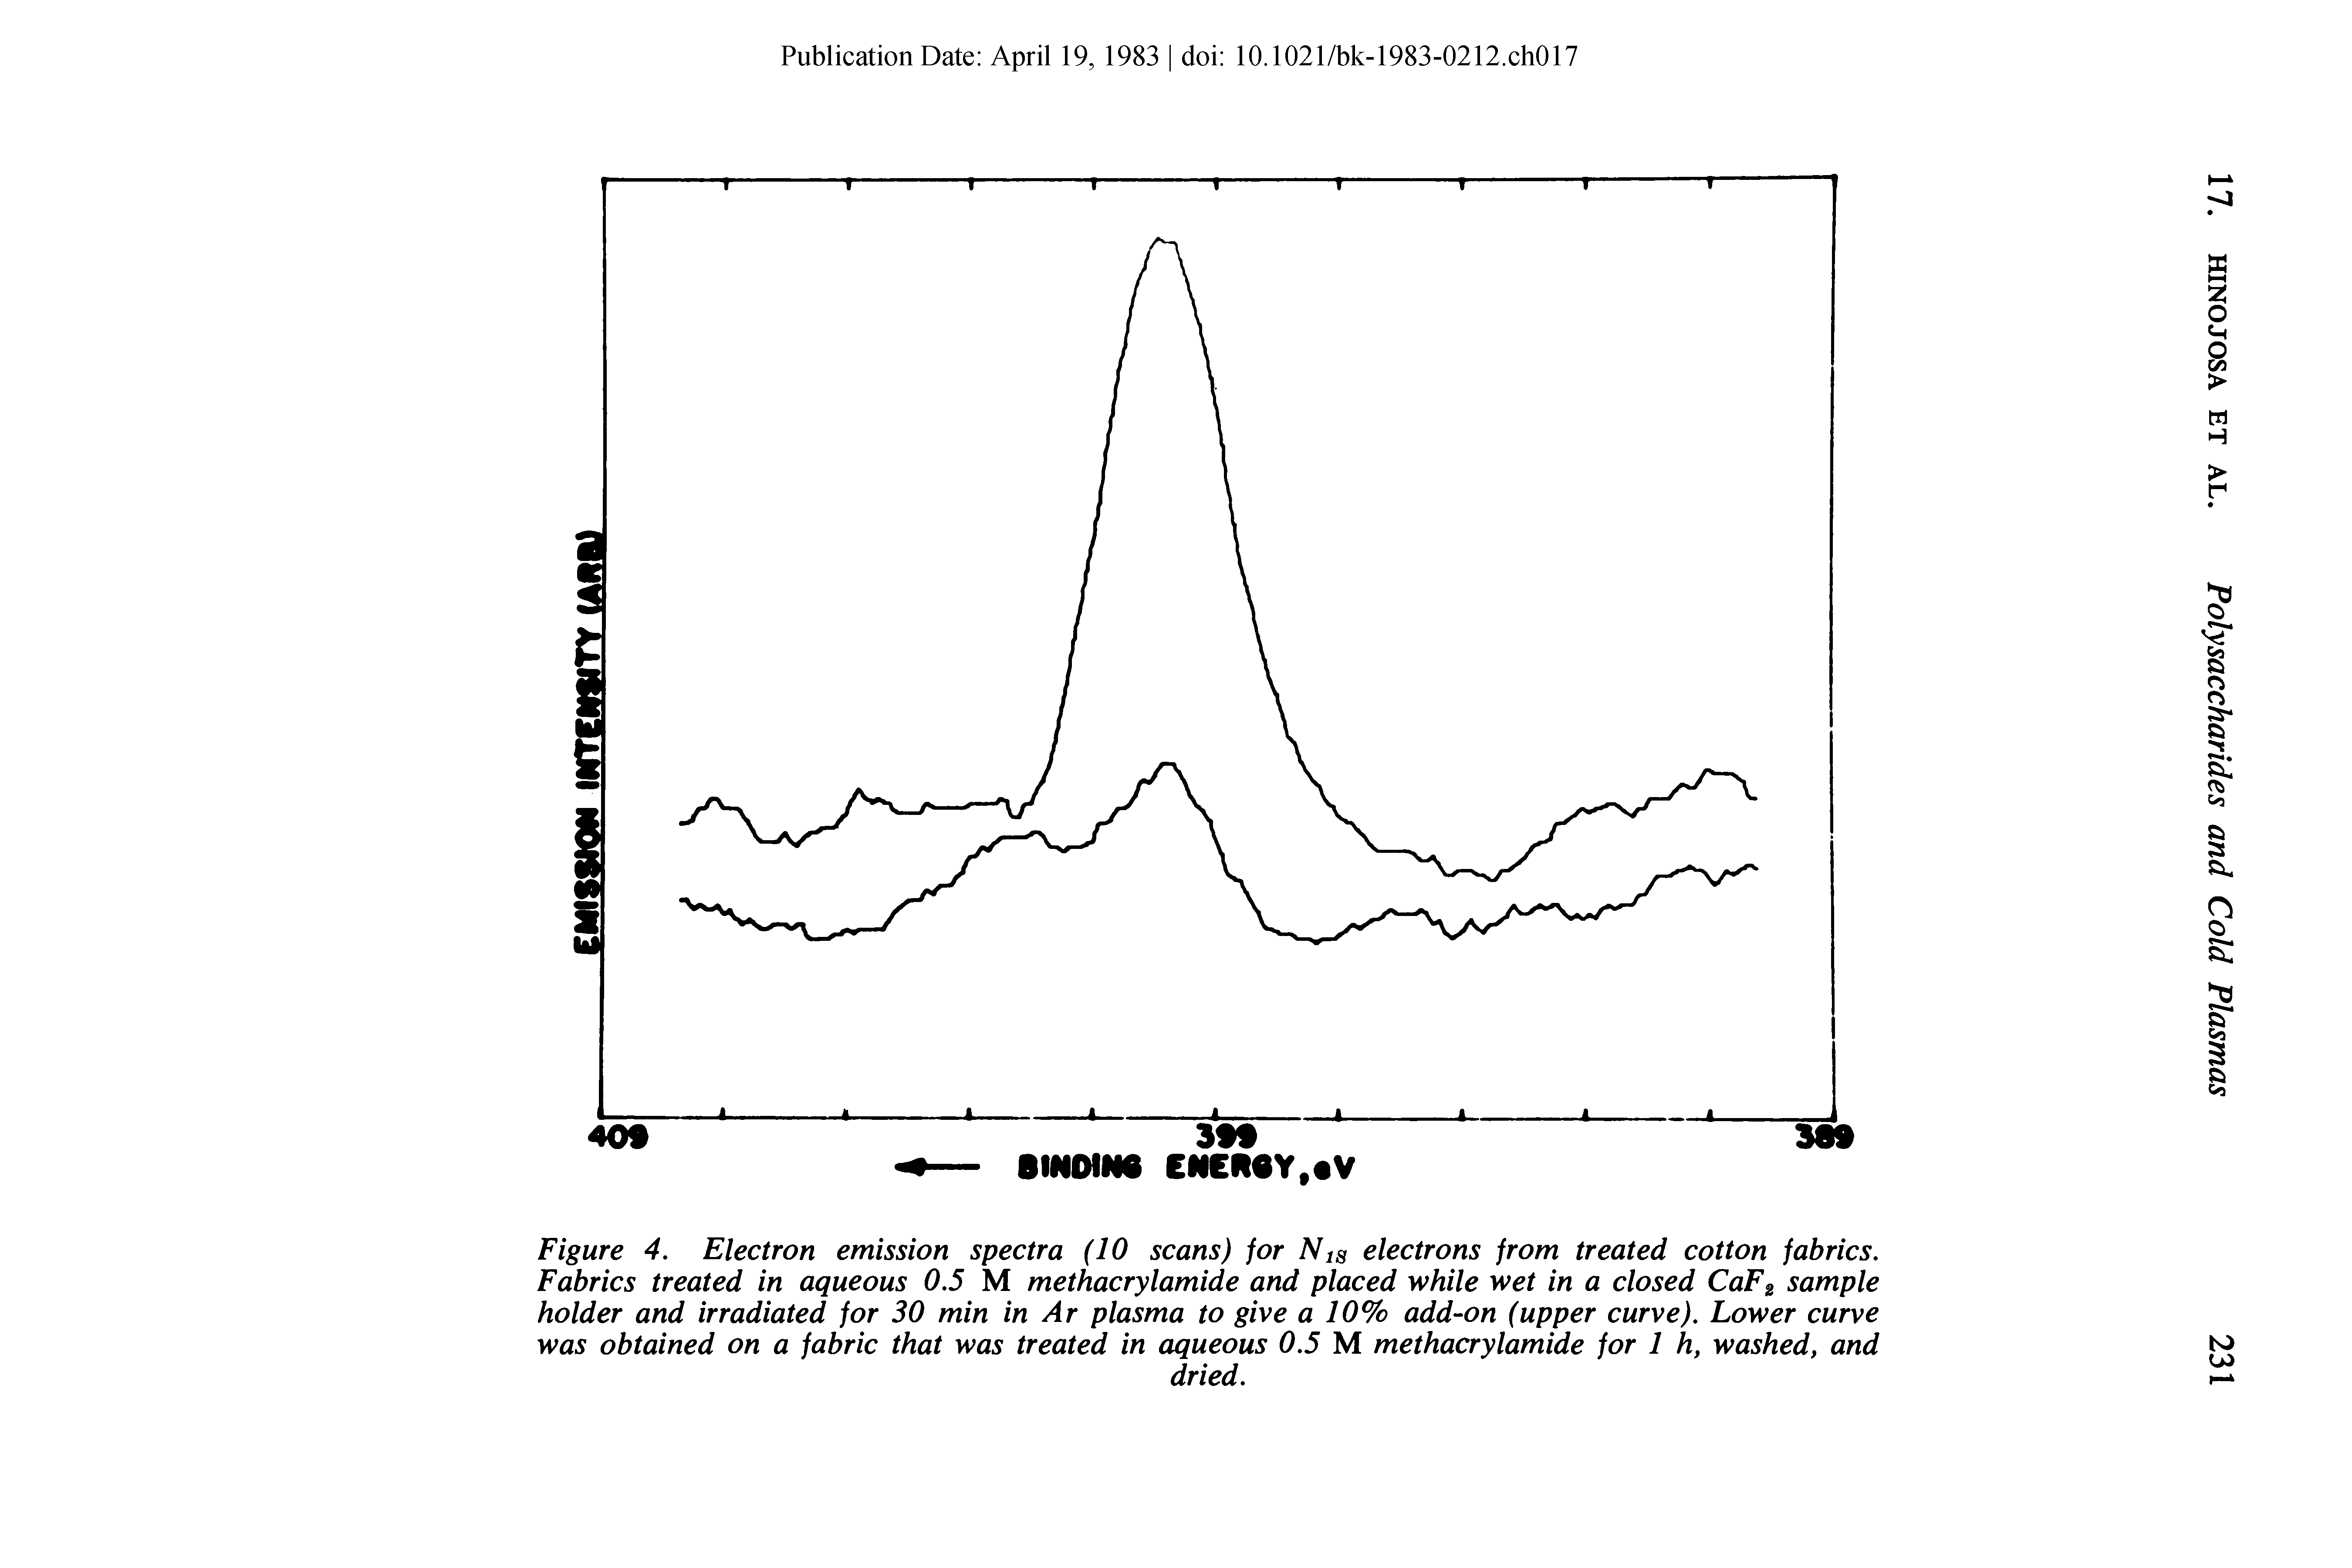 Figure 4. Electron emission spectra (10 scans) for Nts electrons from treated cotton fabrics. Fabrics treated in aqueous 0.5 M methacrylamide and placed while wet in a closed CaFz sample holder and irradiated for 30 min in Ar plasma to give a 10% add-on (upper curve). Lower curve was obtained on a fabric that was treated in aqueous 0.5 M methacrylamide for 1 h, washed, and...